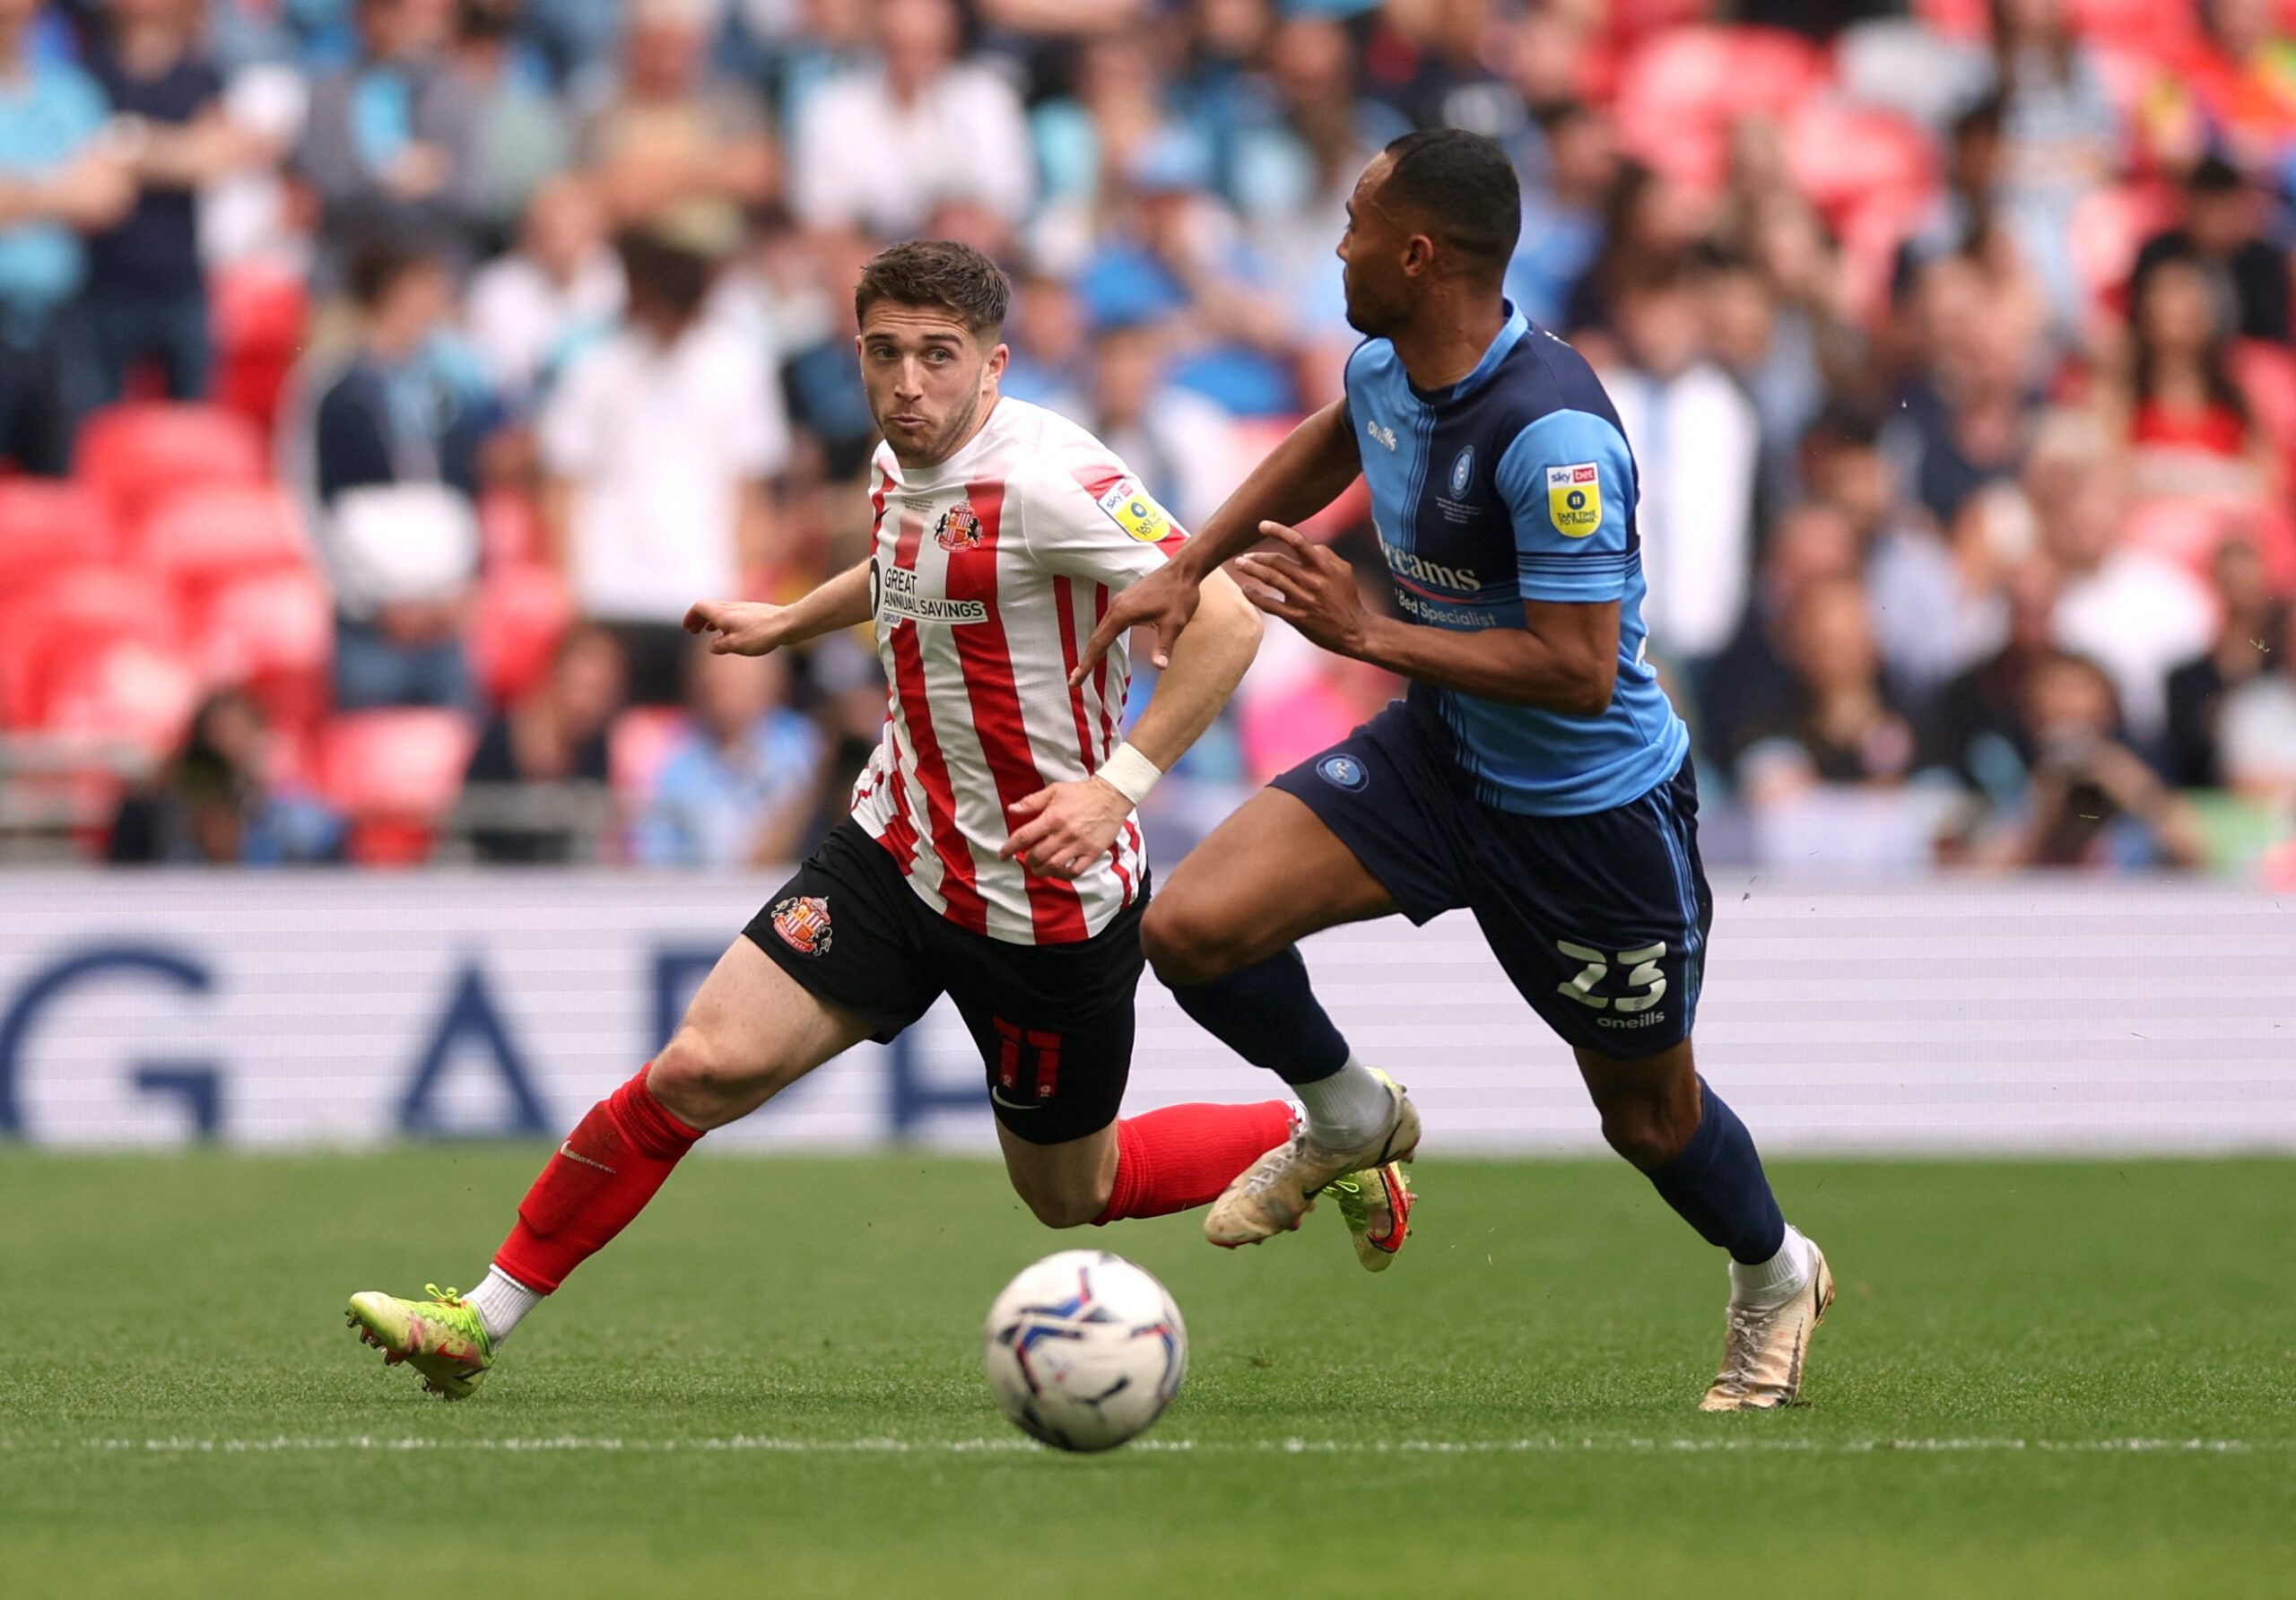 Soccer Football - League One Play-Off Final - Sunderland v Wycombe Wanderers - Wembley Stadium, London, Britain - May 21, 2022  Sunderland's Lynden Gooch in action with Wycombe Wanderers' Jordan Obita Action Images/Matthew Childs EDITORIAL USE ONLY. No use with unauthorized audio, video, data, fixture lists, club/league logos or 'live' services. Online in-match use limited to 75 images, no video emulation. No use in betting, games or single club /league/player publications.  Please contact your 